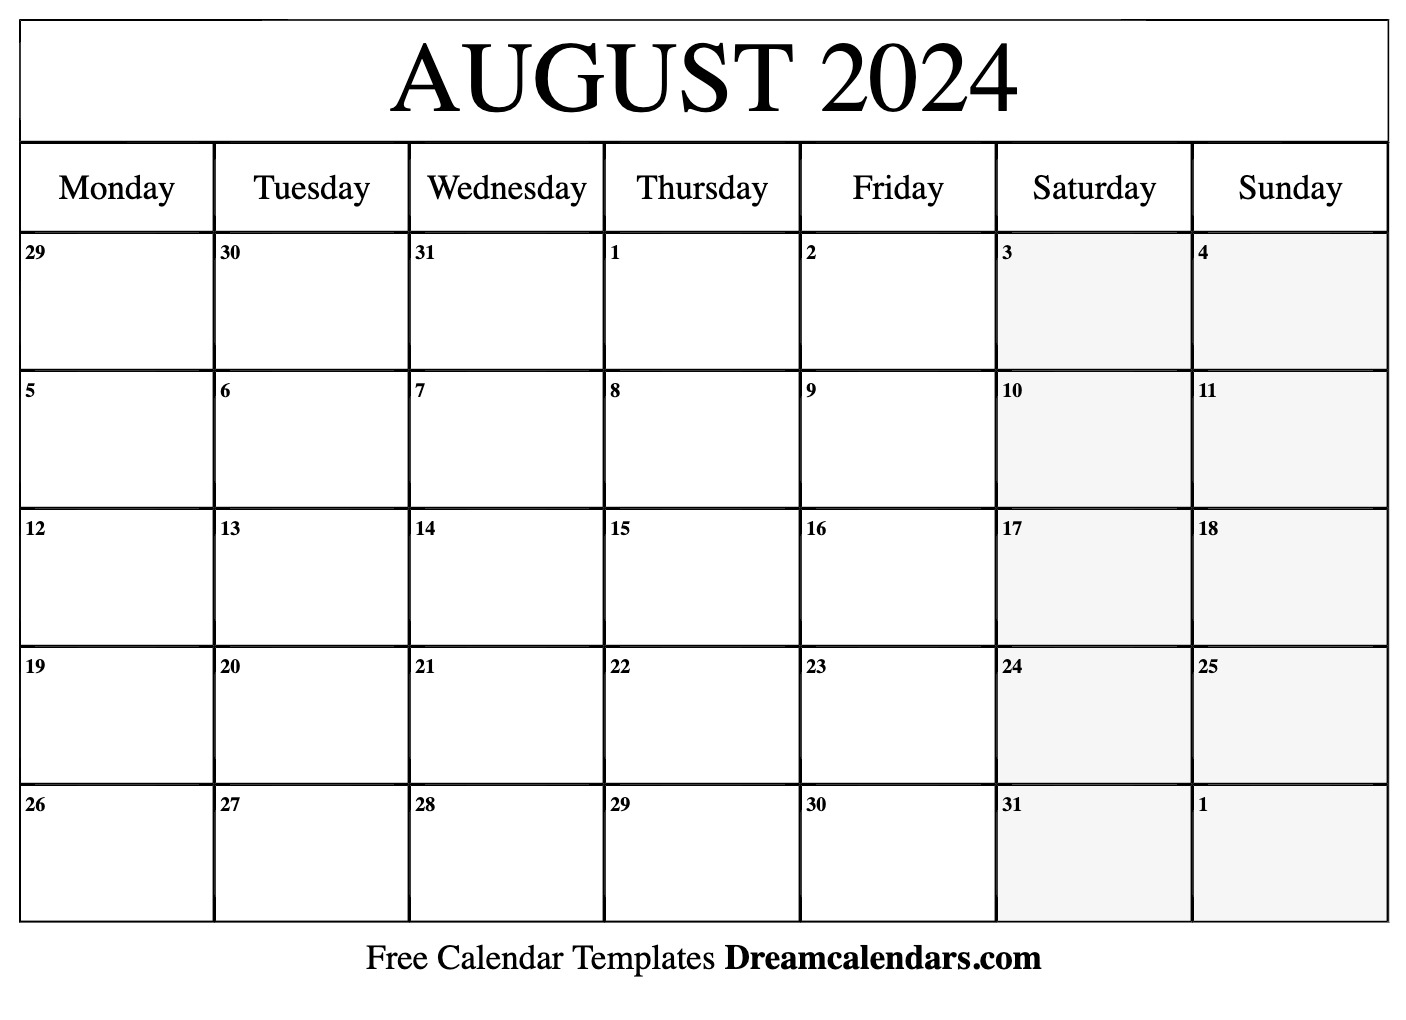 August 2024 Calendar | Free Blank Printable With Holidays for Blank Calendar August 2024 Printable